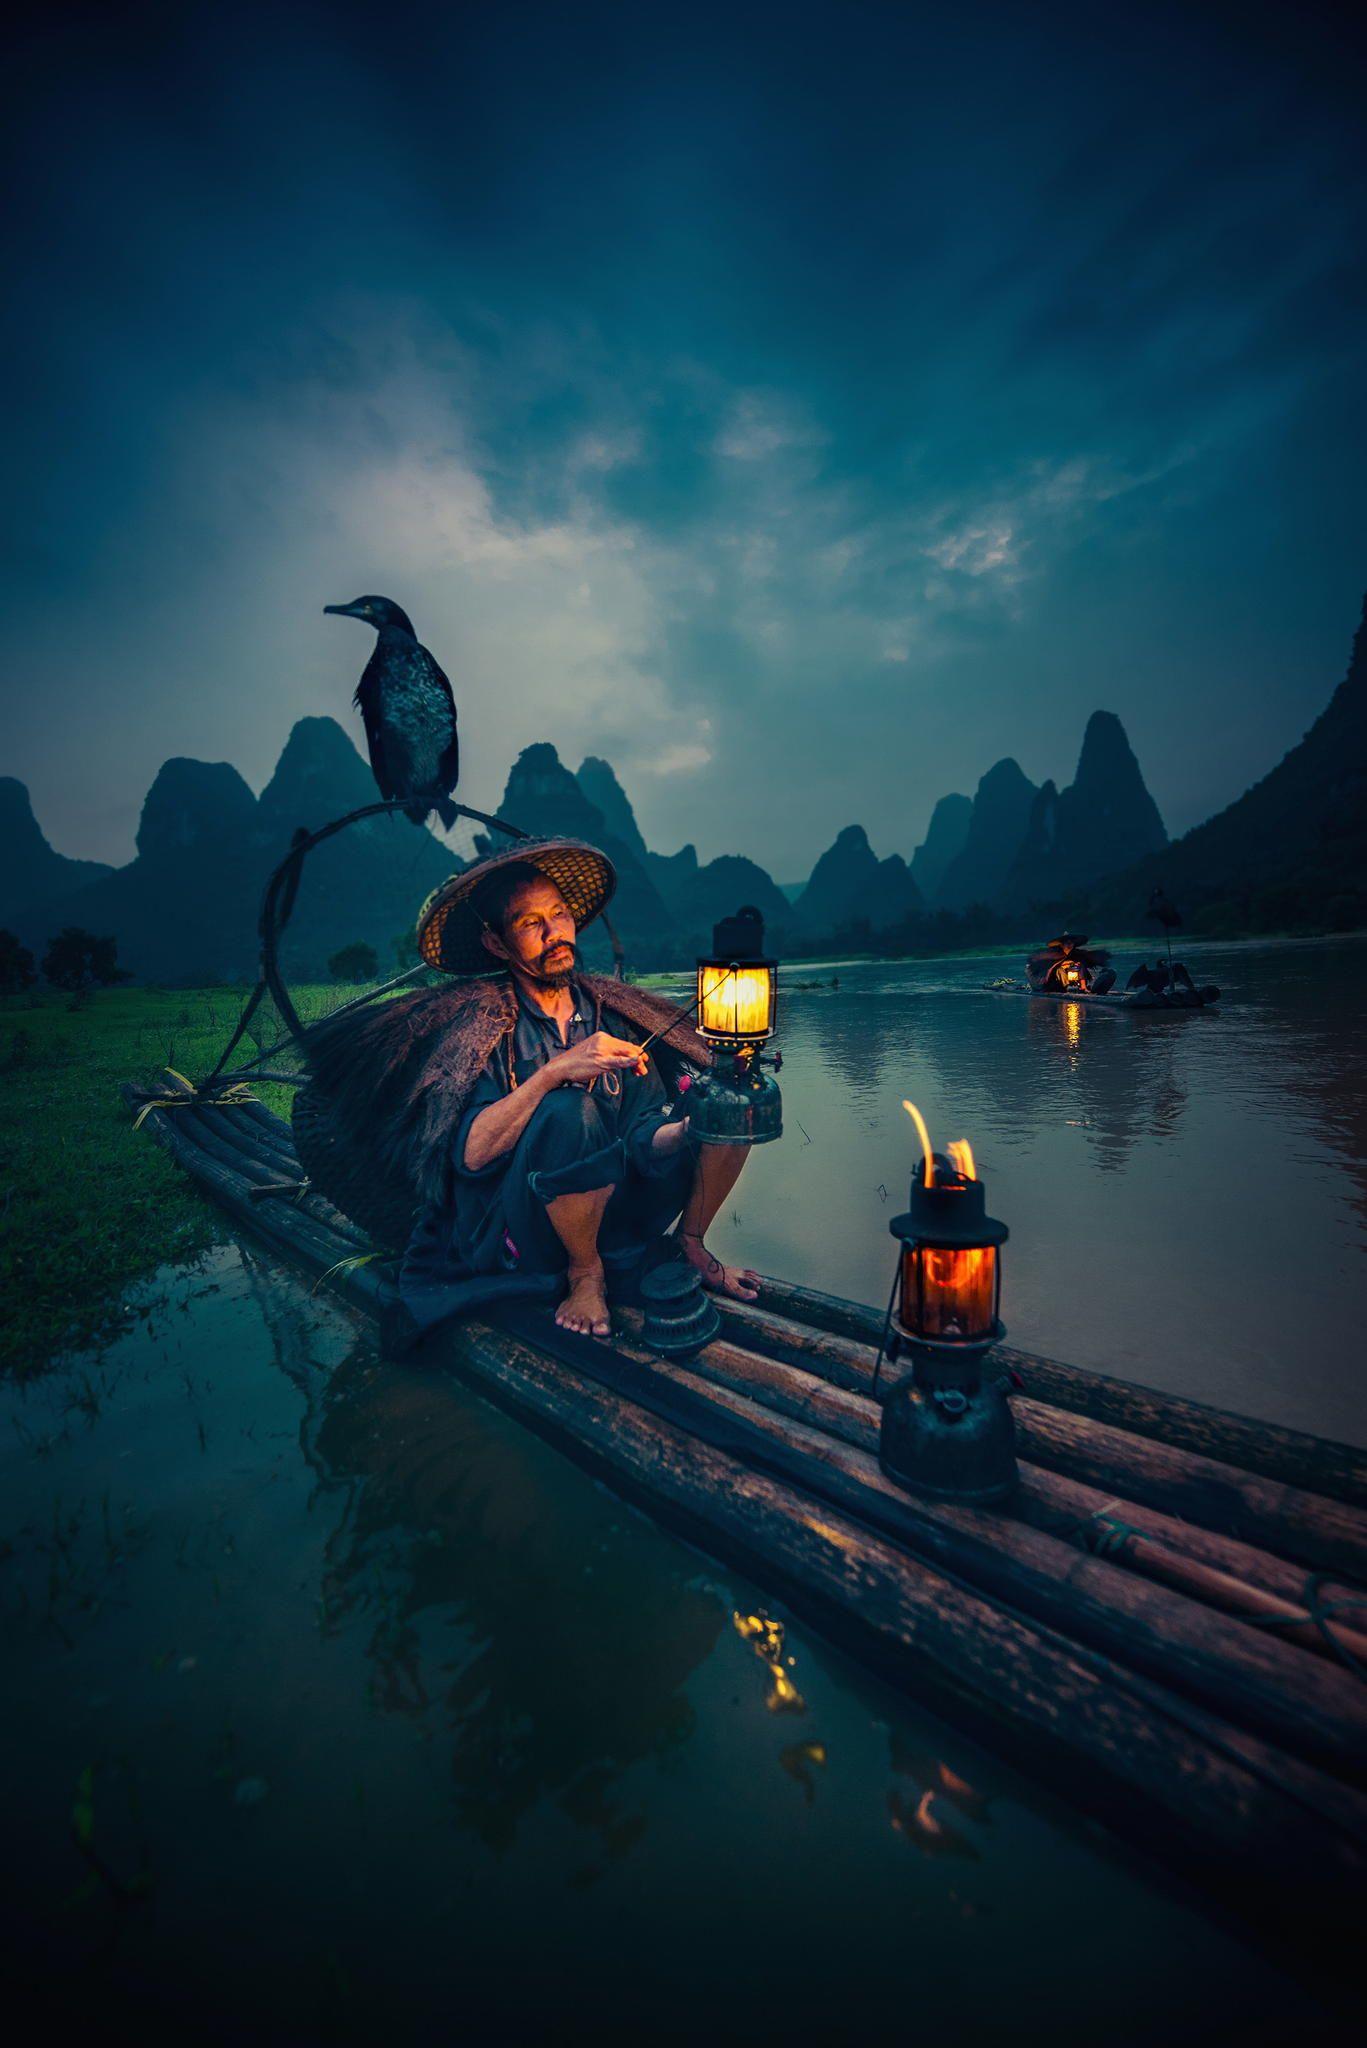 Cormorant Fisherman by Tom Anderson on 500px. Badass